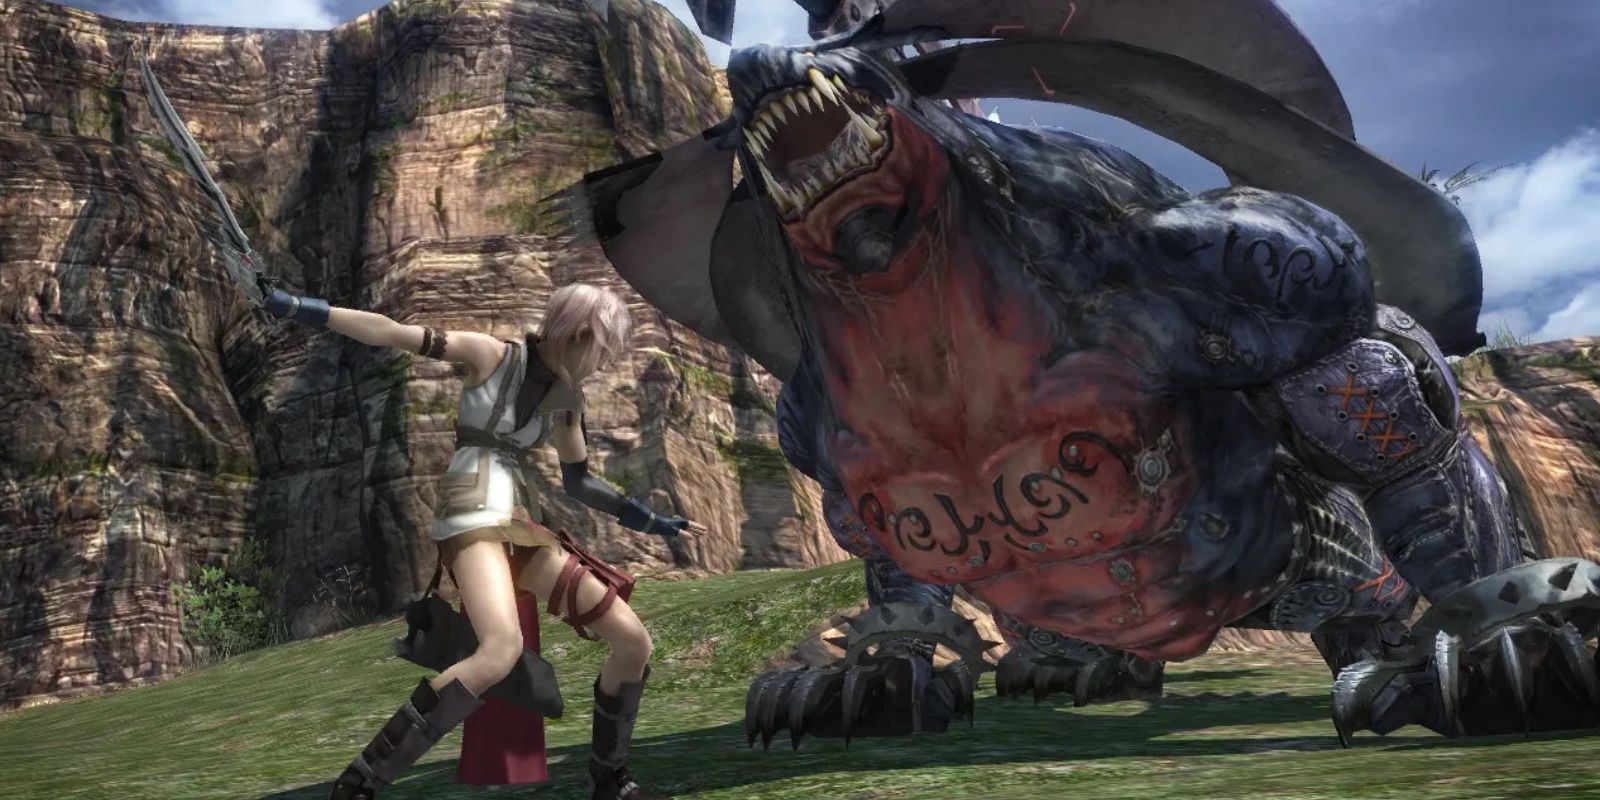 Final Fantasy XIII gameplay featuring a dragon fight.